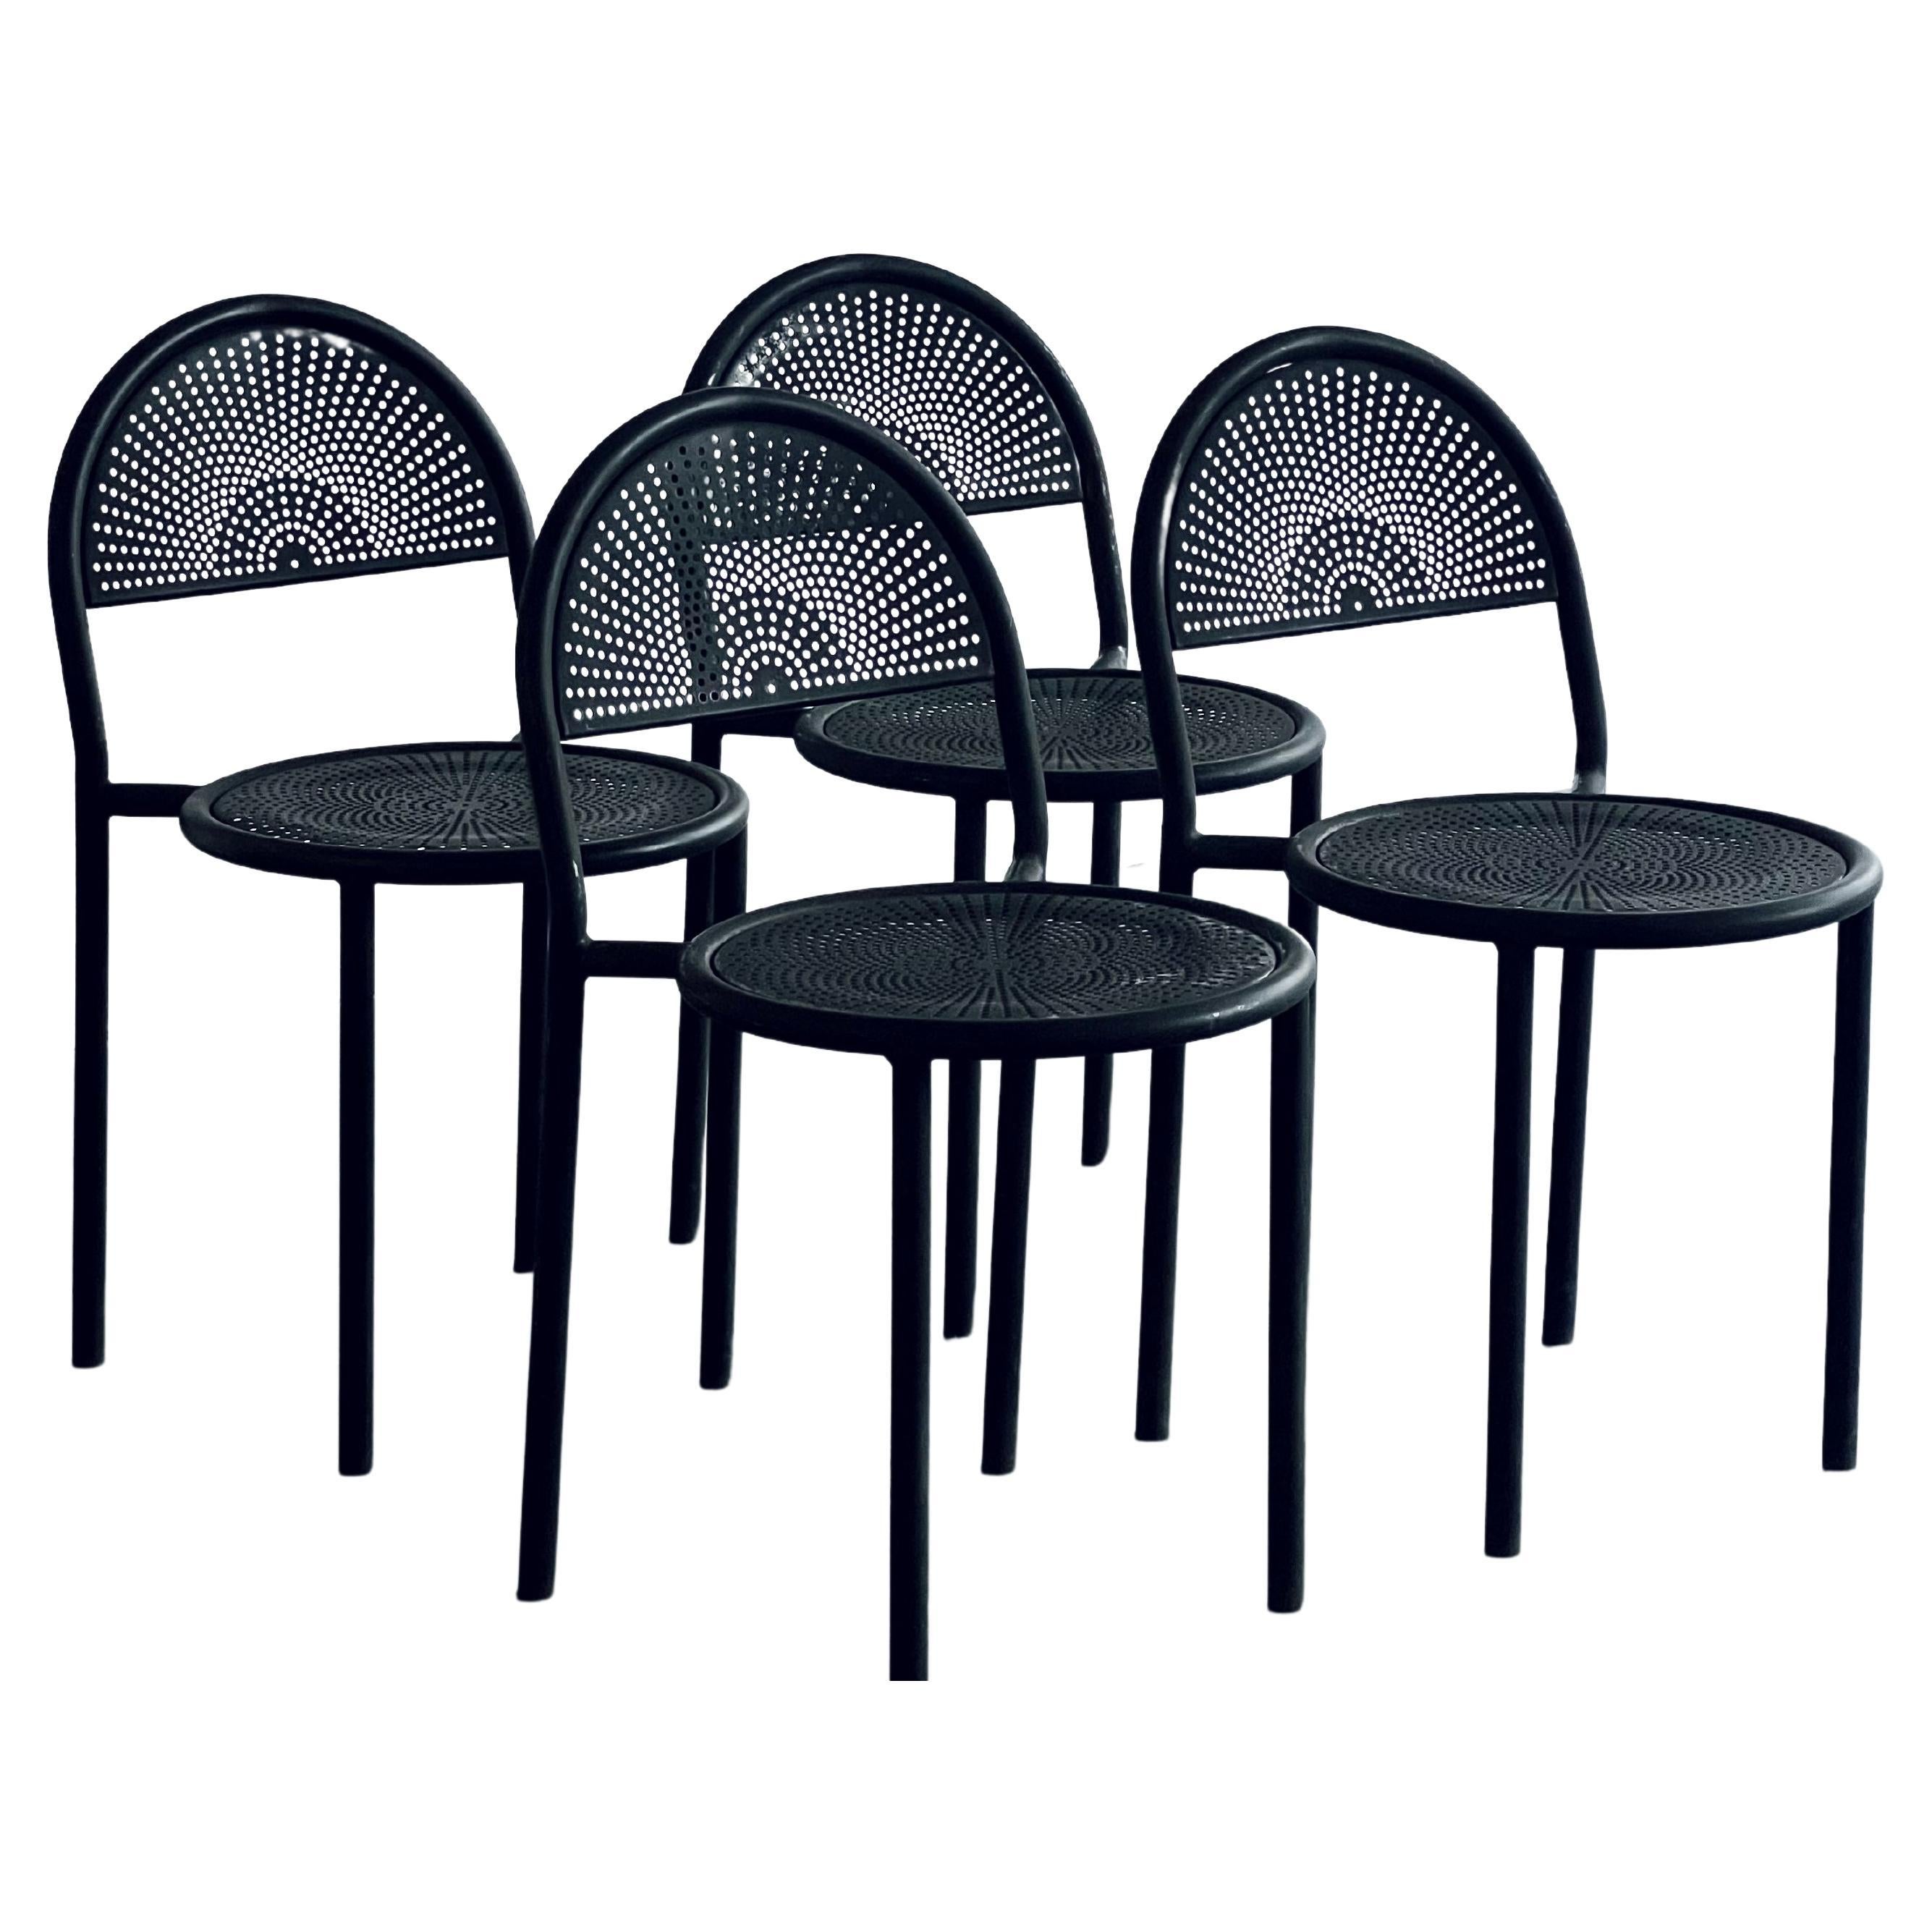 Retro Memphis Style Metal Dining Chair Set For Sale